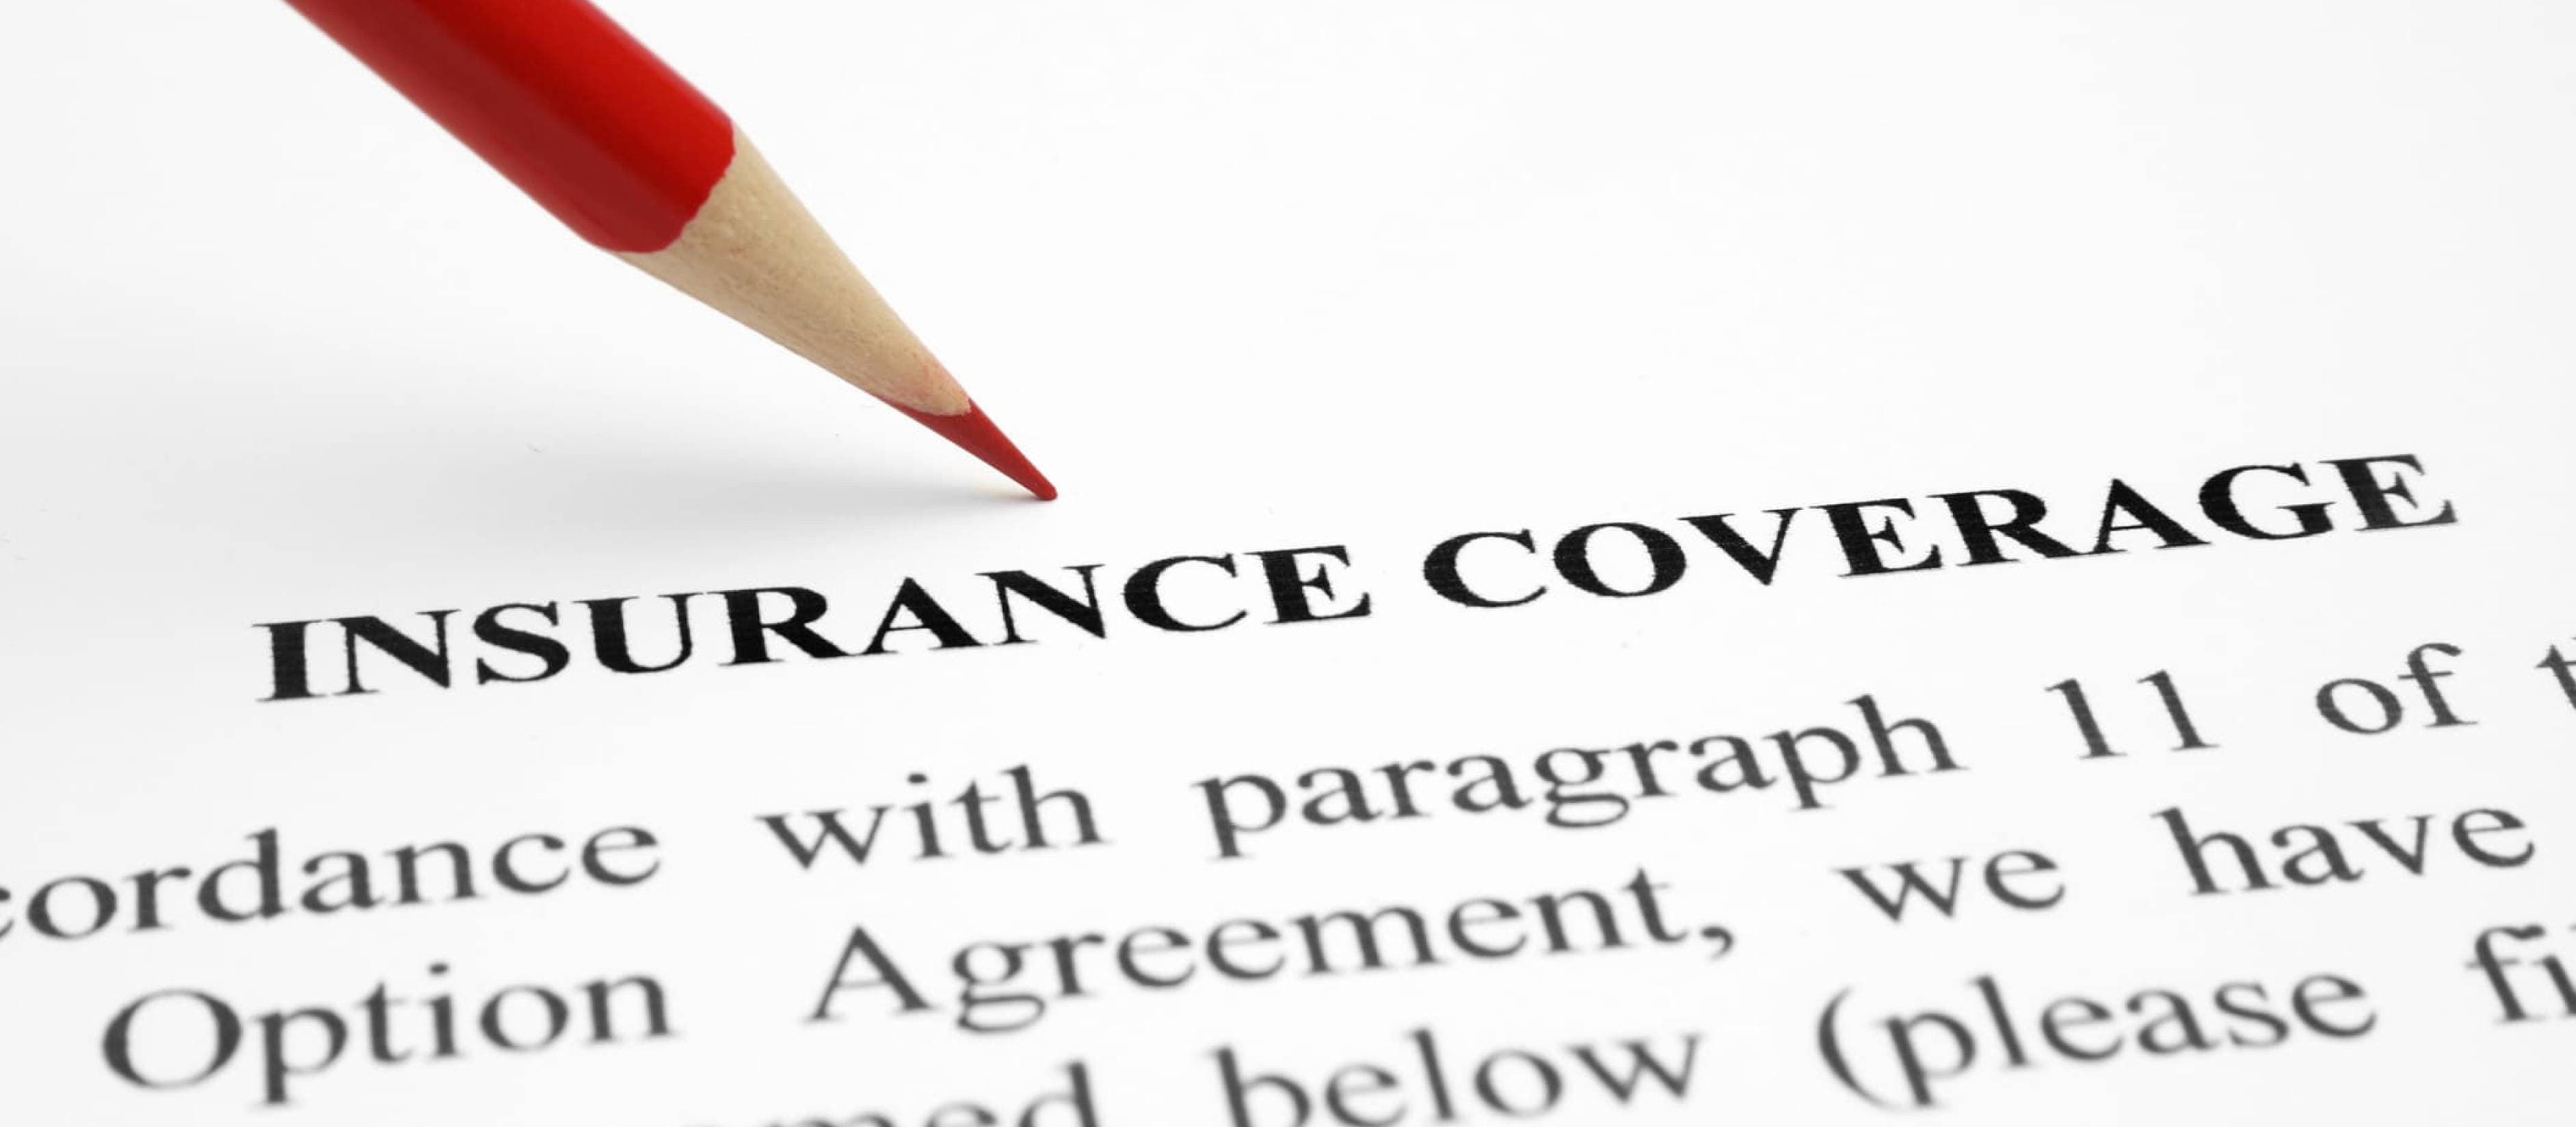 red pencil above insurance coverage text